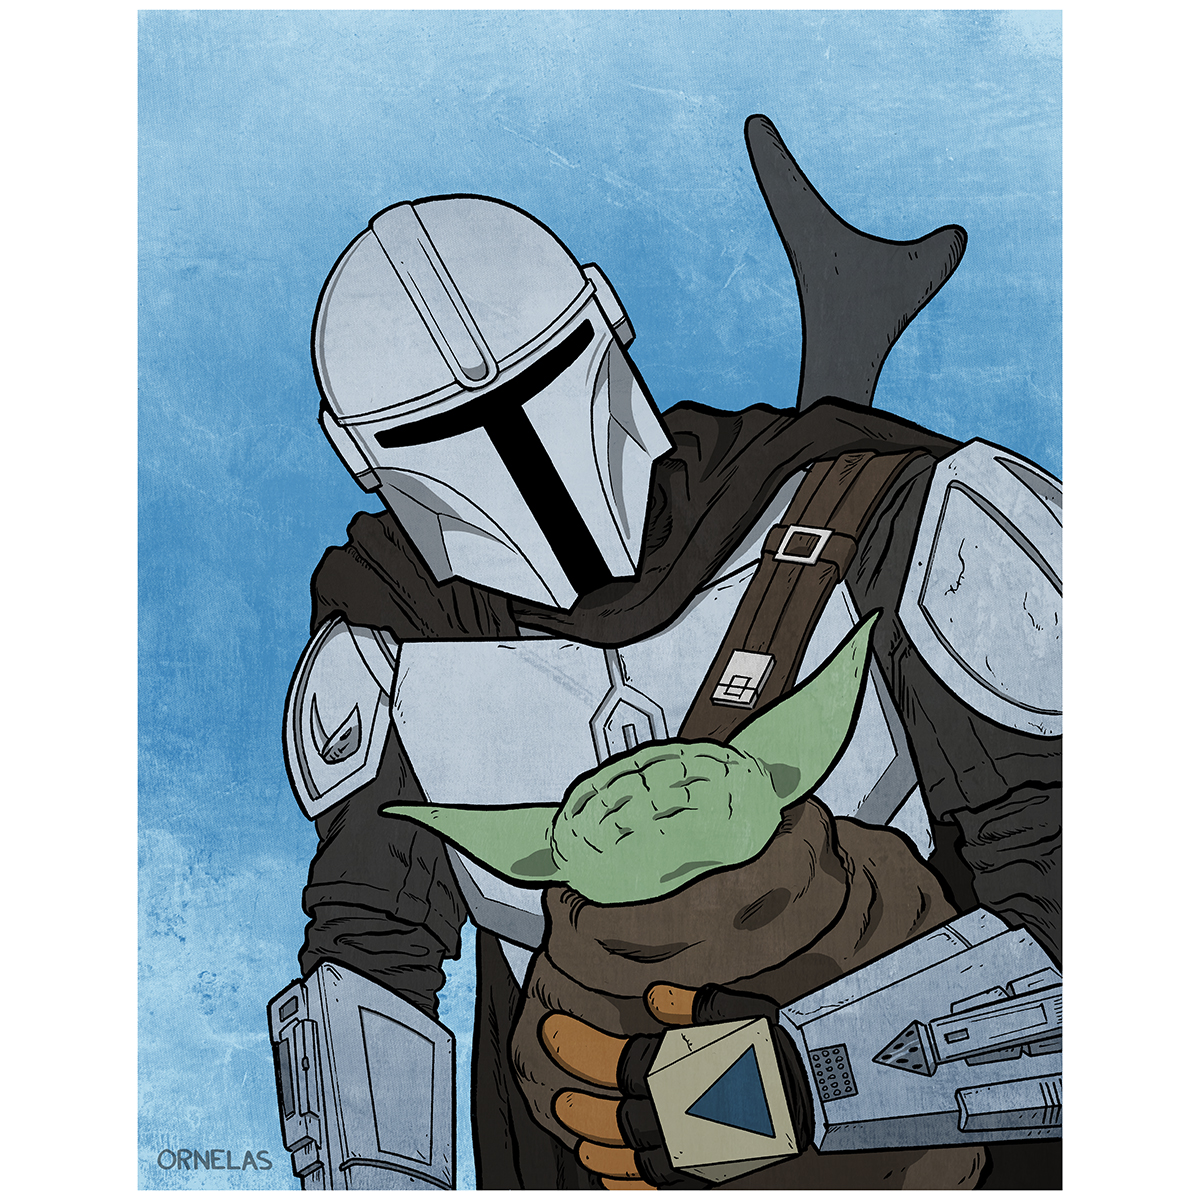 May The First Be With You #BuyOrnelasArt
#commissionsopen #comicbooks #comix #supportlocalartists #shopsmall #supportindieartists #starwarsart #maythe4thbewithyou #maythefourth #themandalorian #grogu #dindjarin